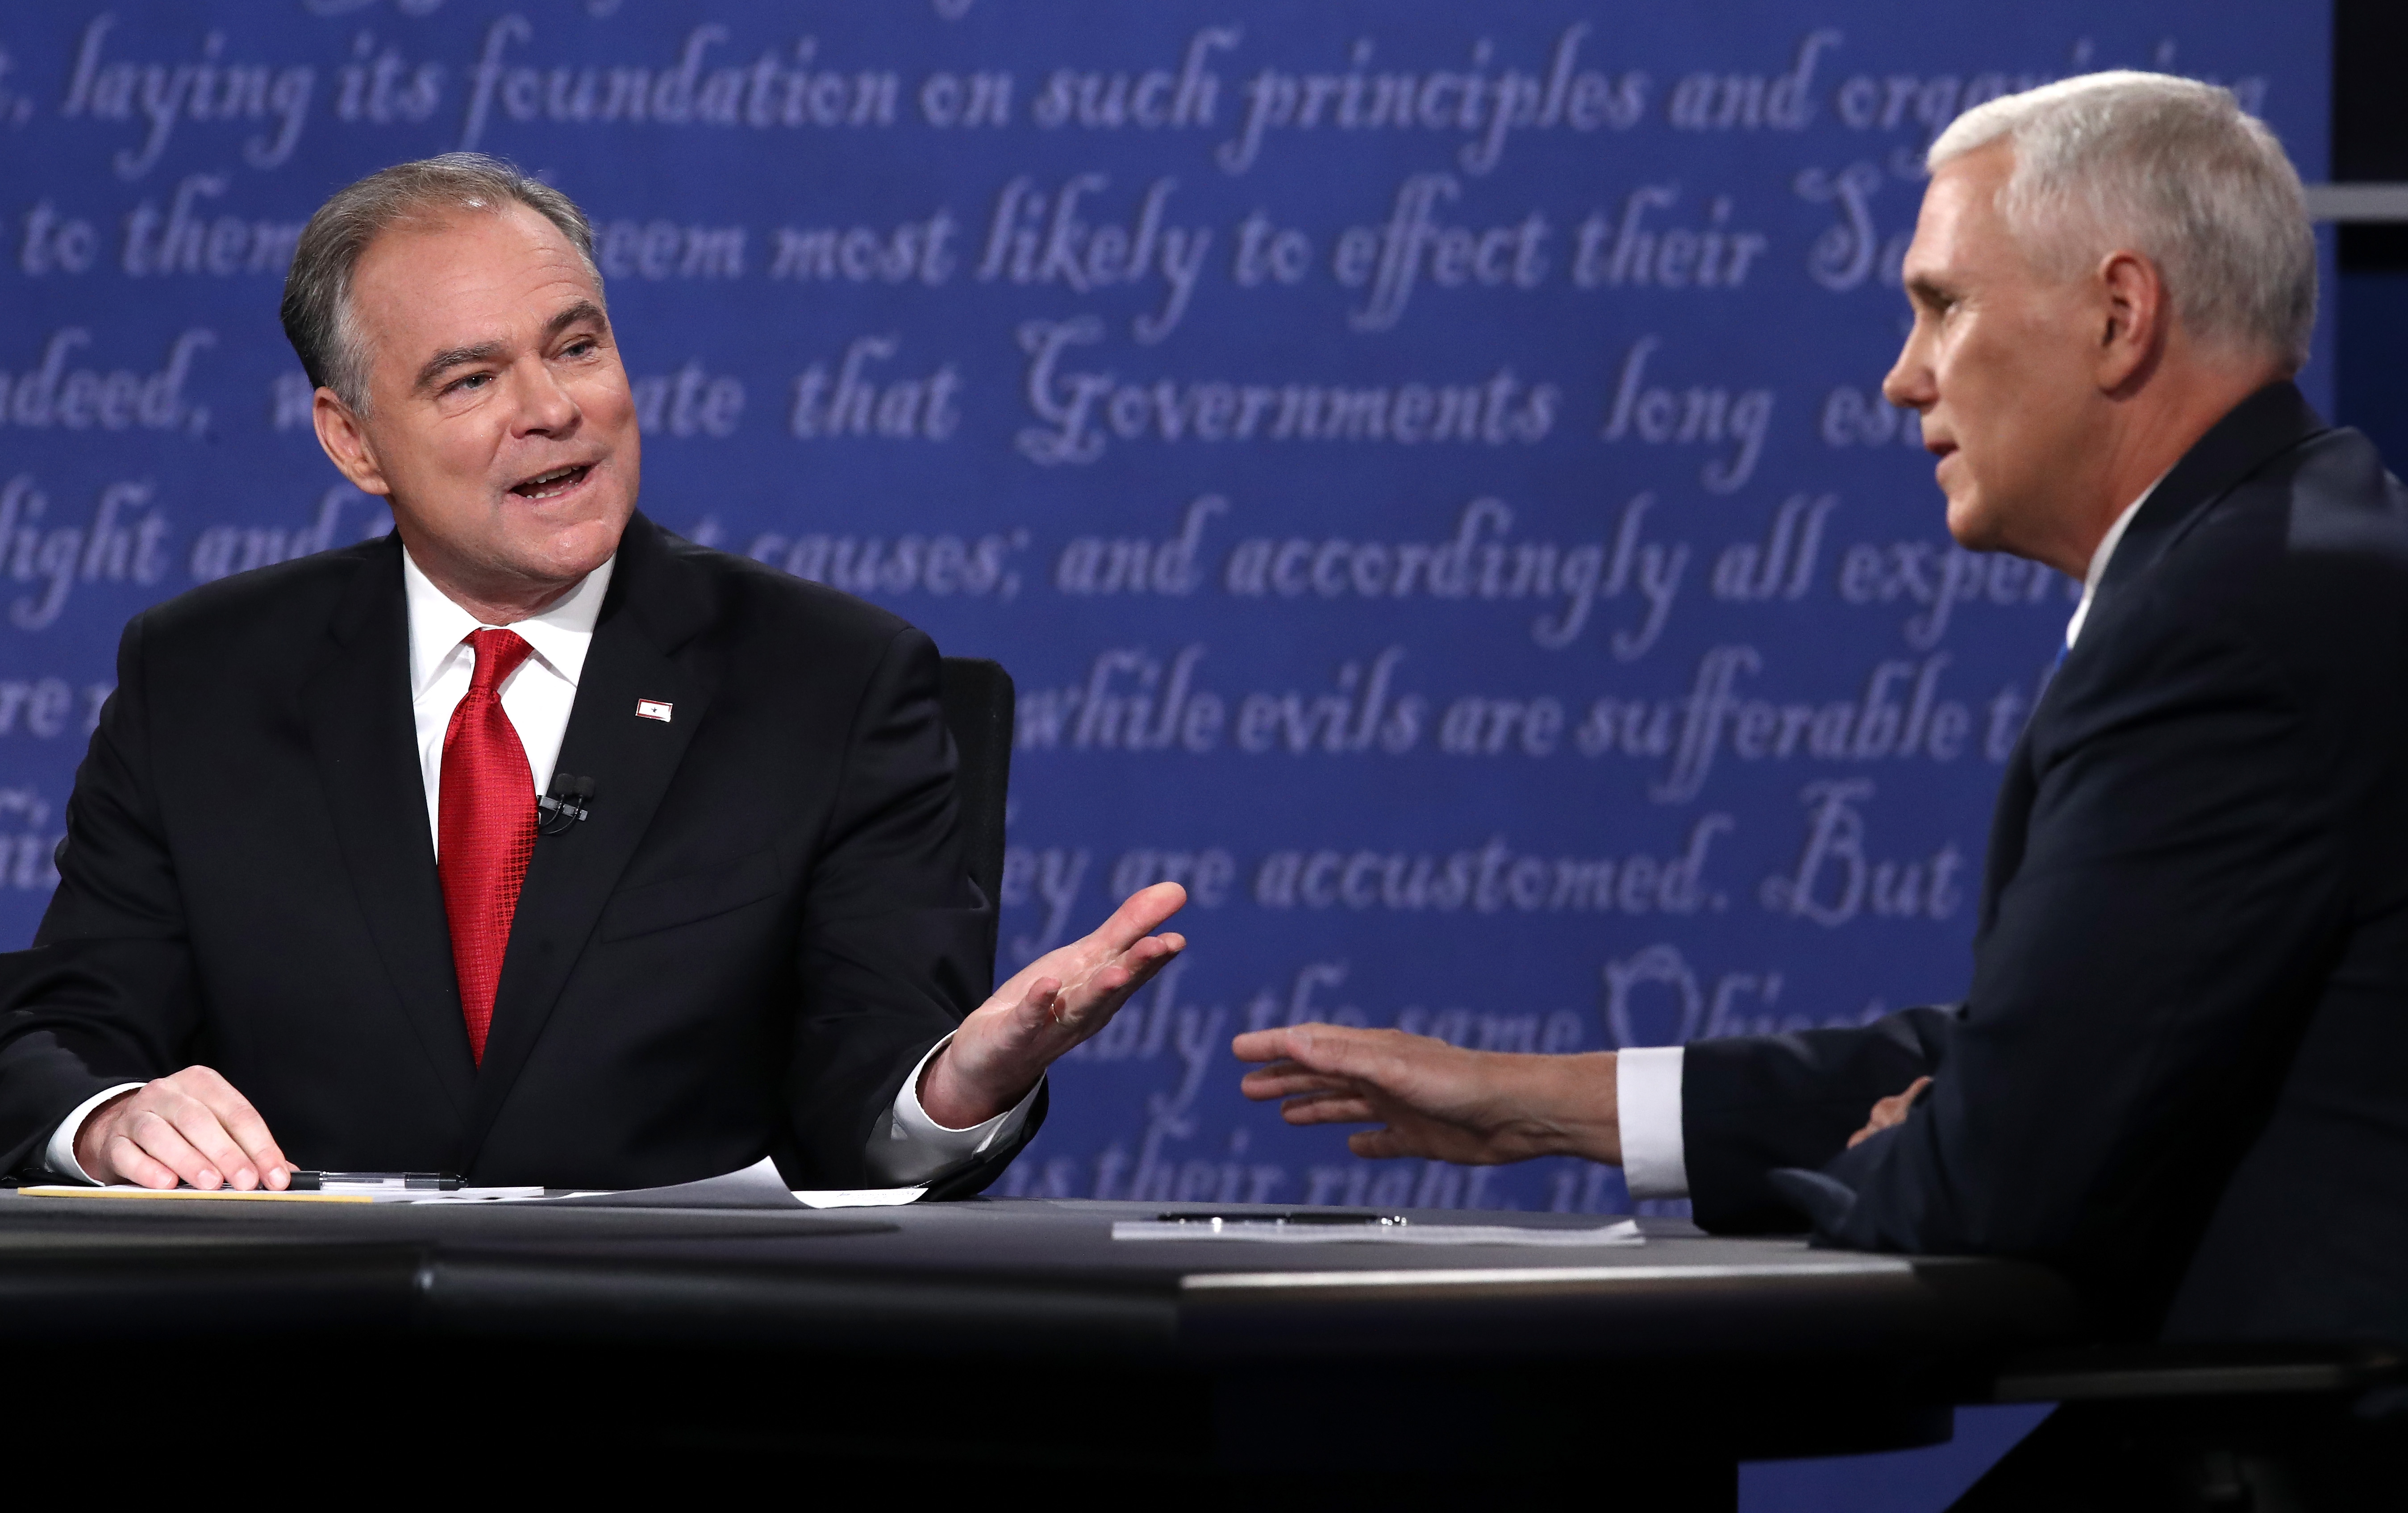 FARMVILLE, VA - OCTOBER 04: Democratic vice presidential nominee Tim Kaine (L) and Republican vice presidential nominee Mike Pence (R) speak during the Vice Presidential Debate at Longwood University on October 4, 2016 in Farmville, Virginia. This is the second of four debates during the presidential election season and the only debate between the vice presidential candidates.   Win McNamee/Getty Images/AFP